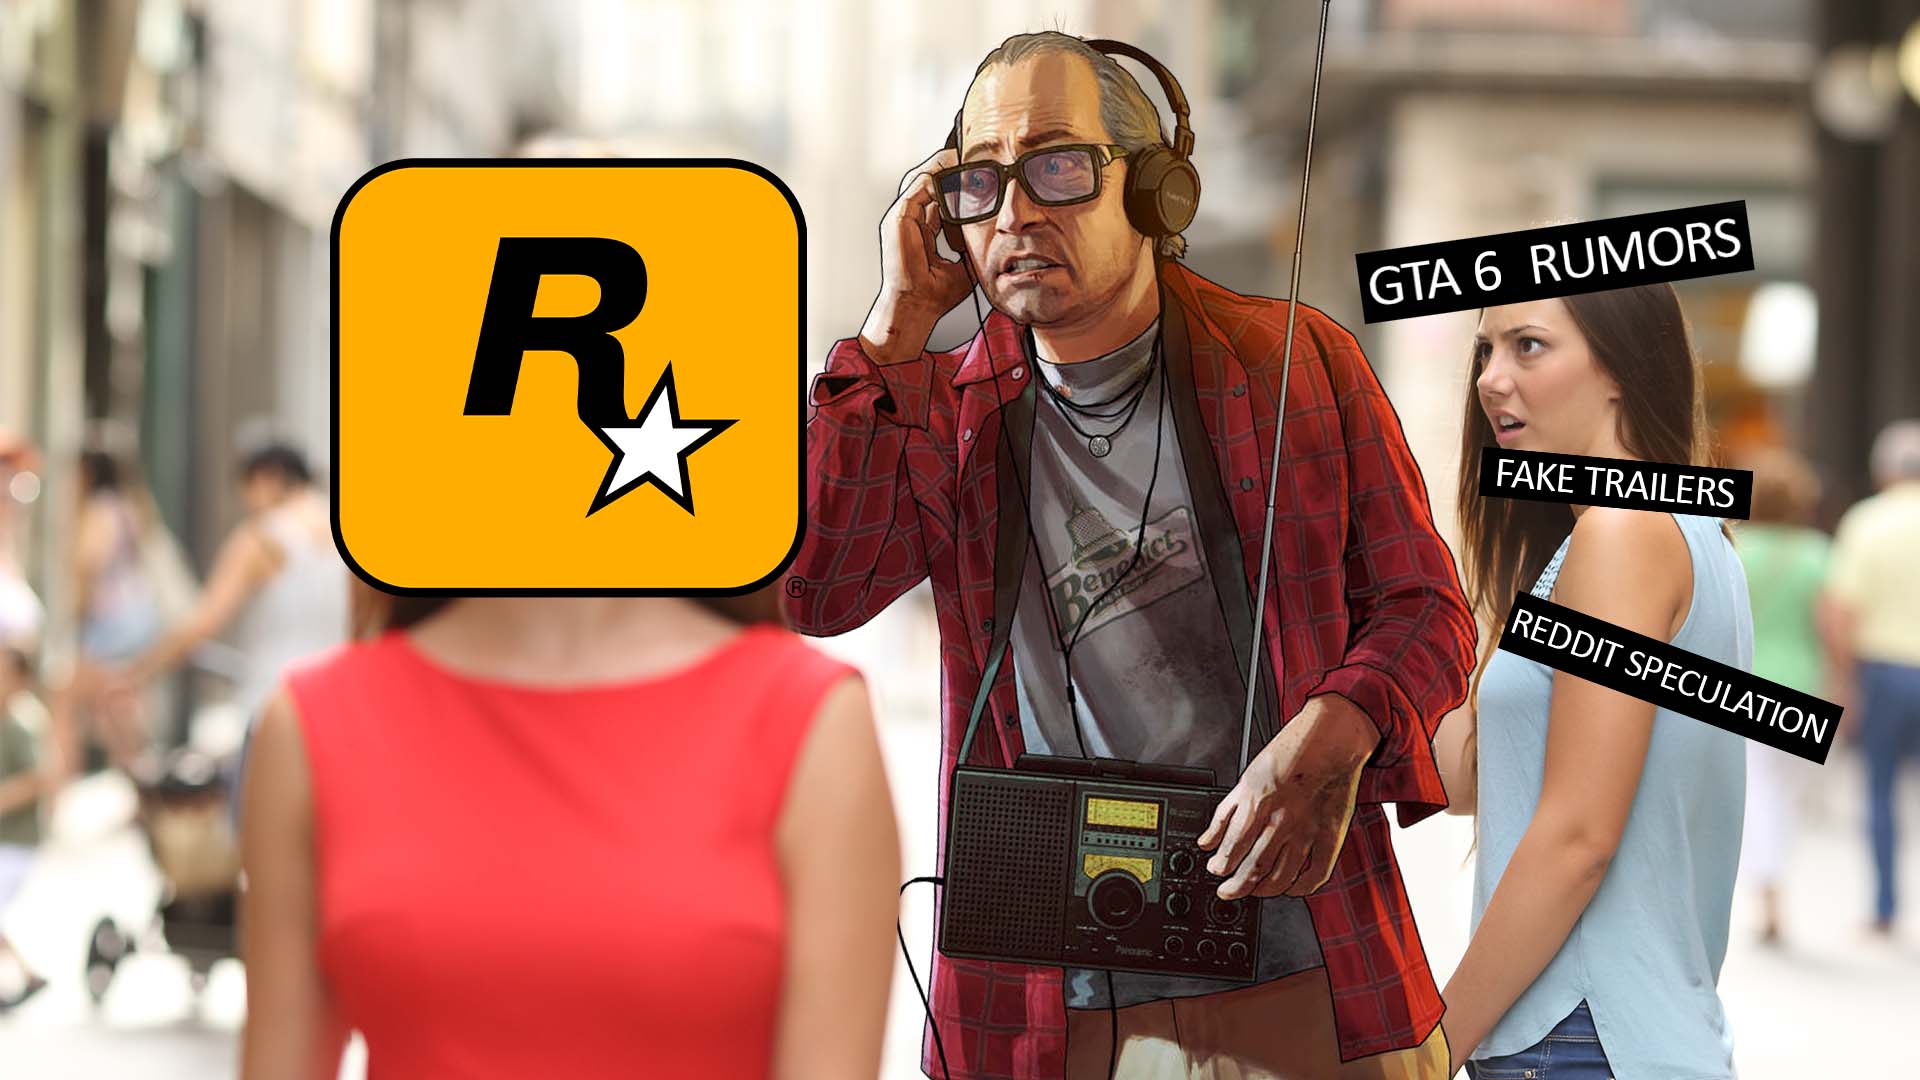 metacritic page for gta 6 has been opened : r/rockstar